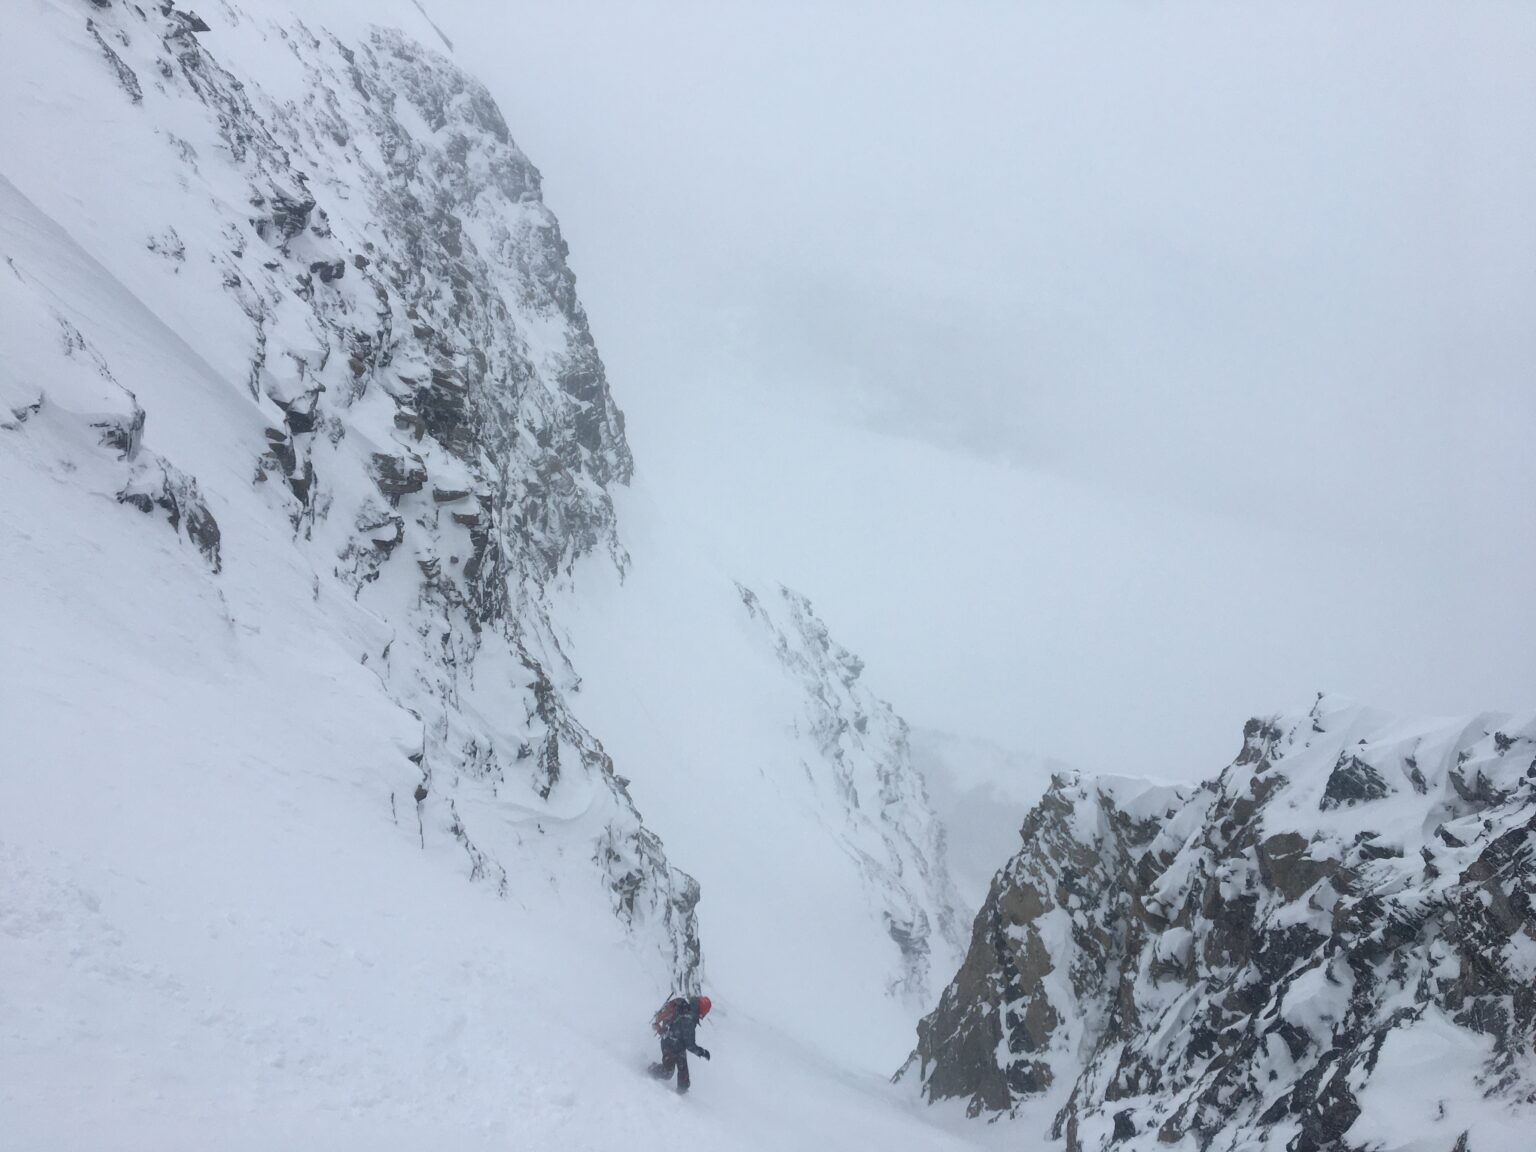 Riding down the lower section of the West Couloir of Rostafjellet